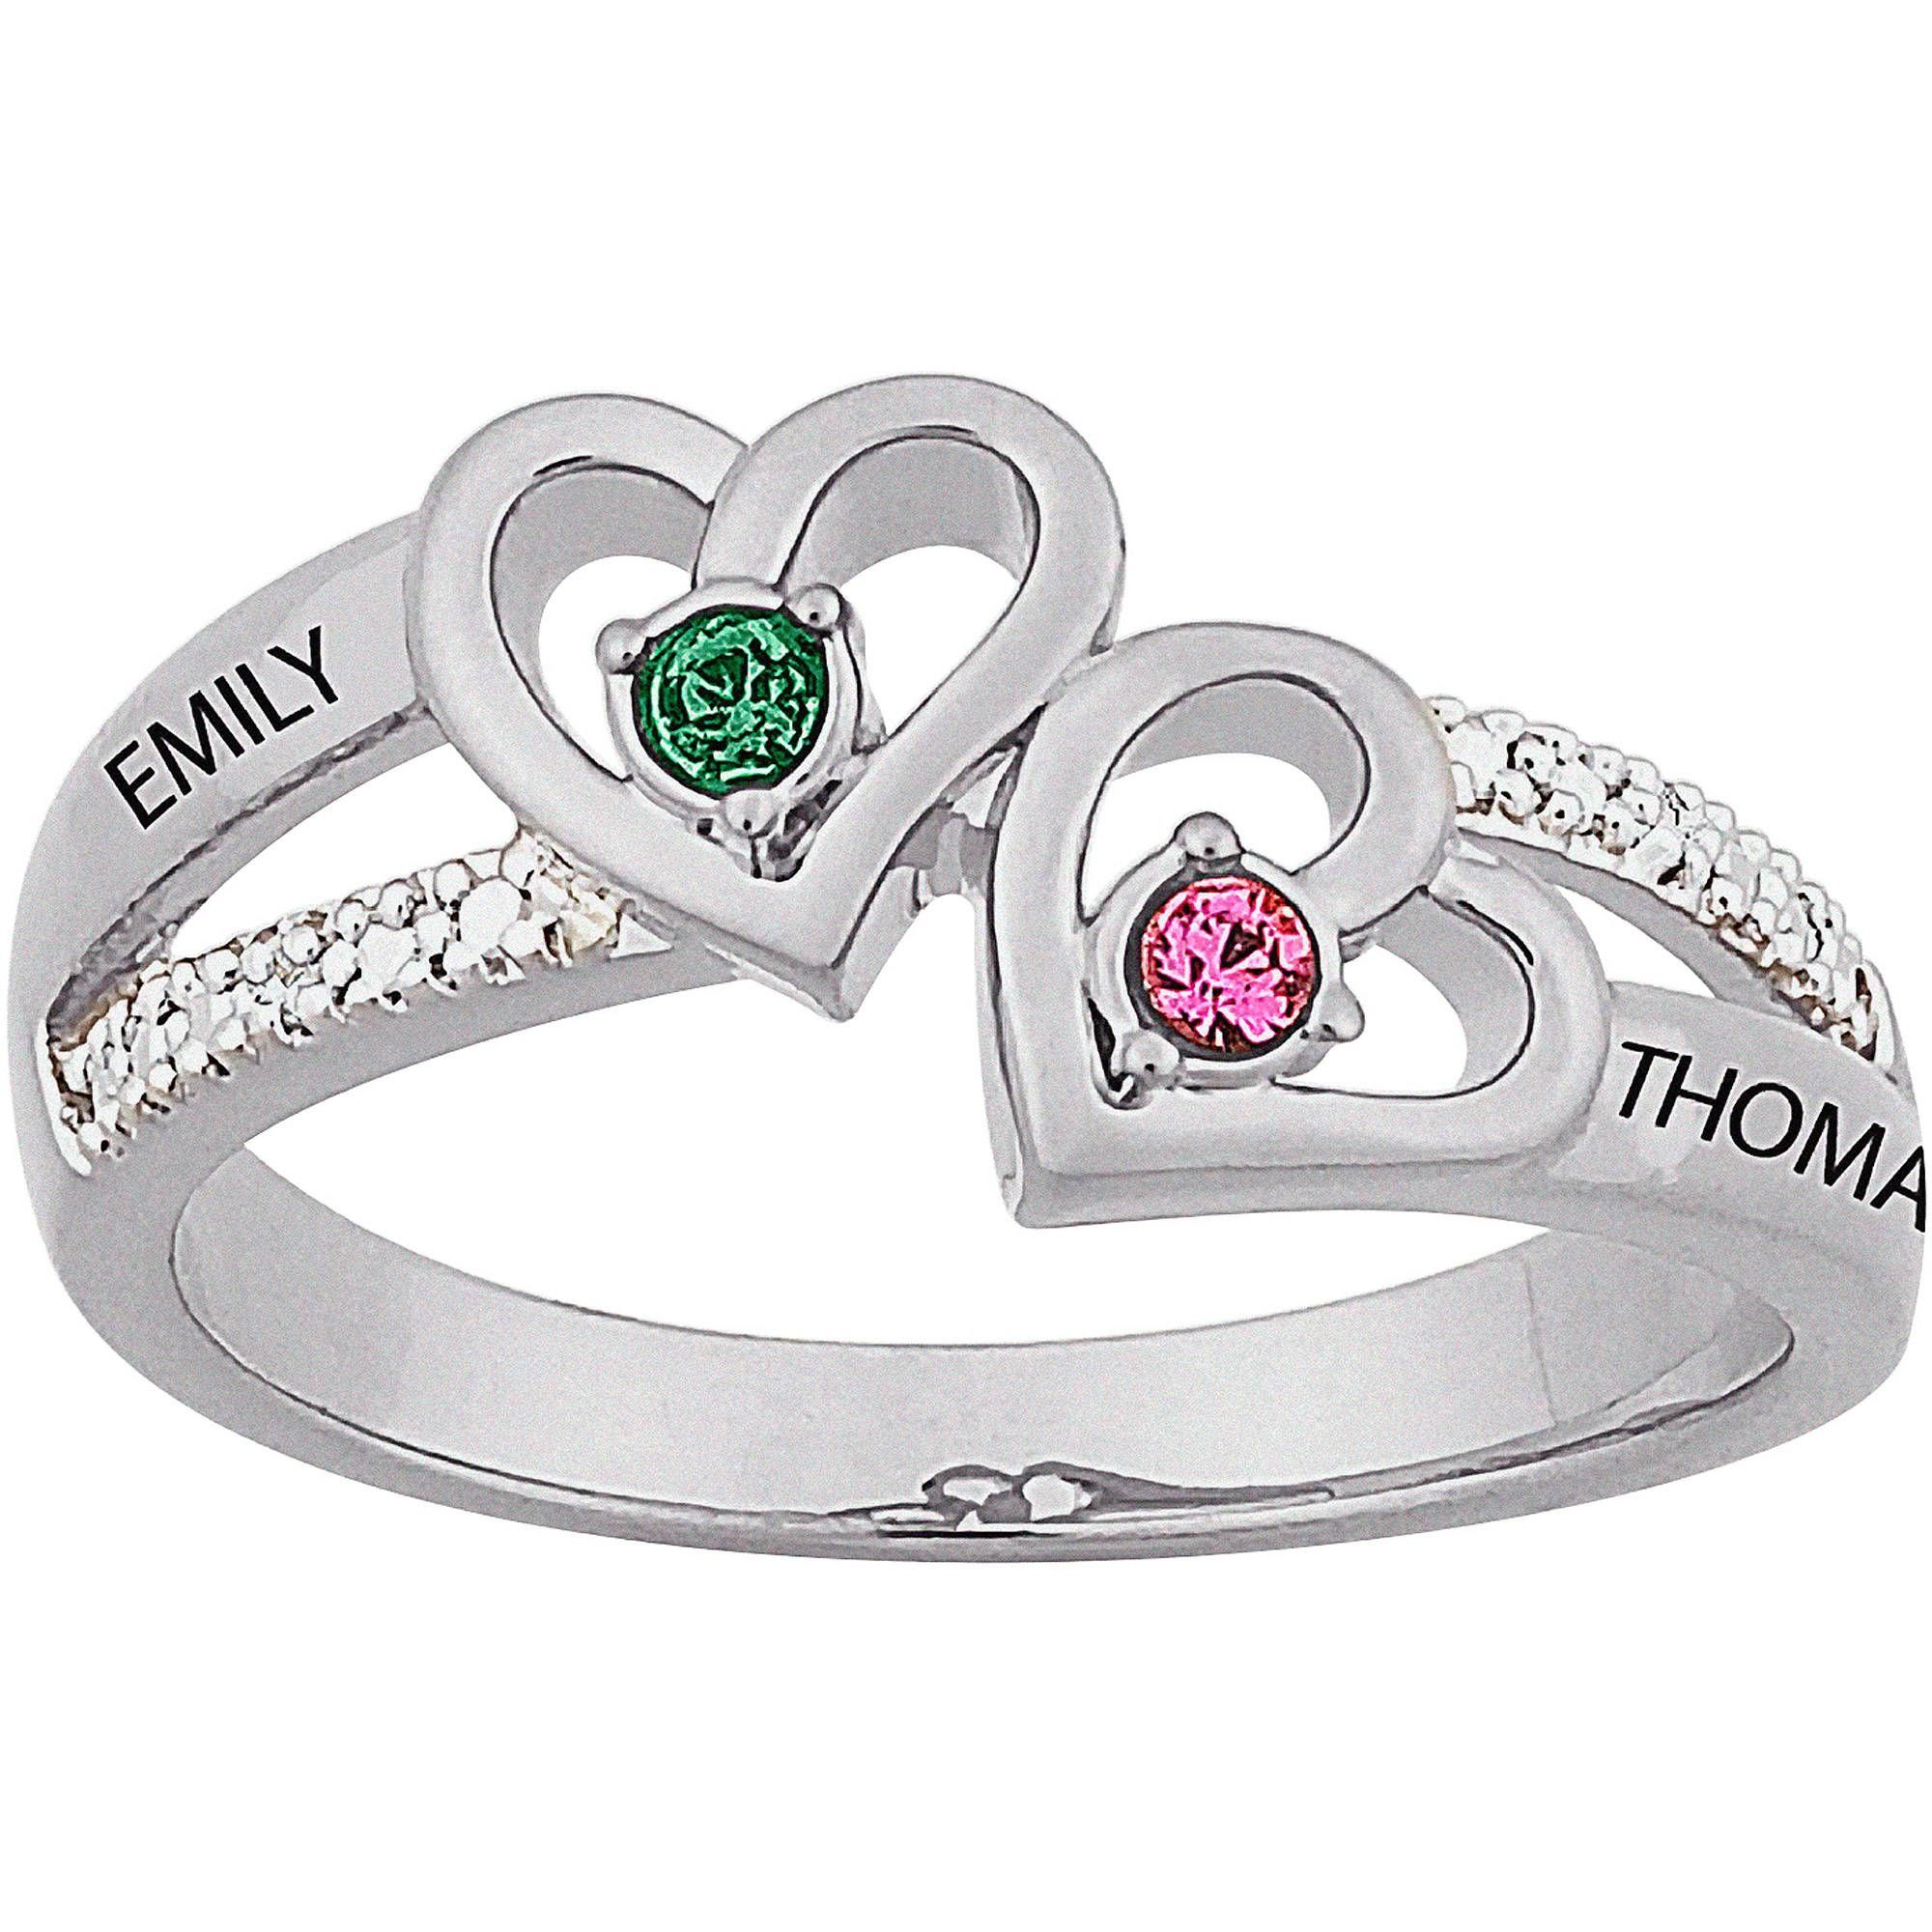 Personalized Sterling Silver Couples Heart Birthstone & Name Pertaining To Engagement Rings For Couples In Gold (View 4 of 15)